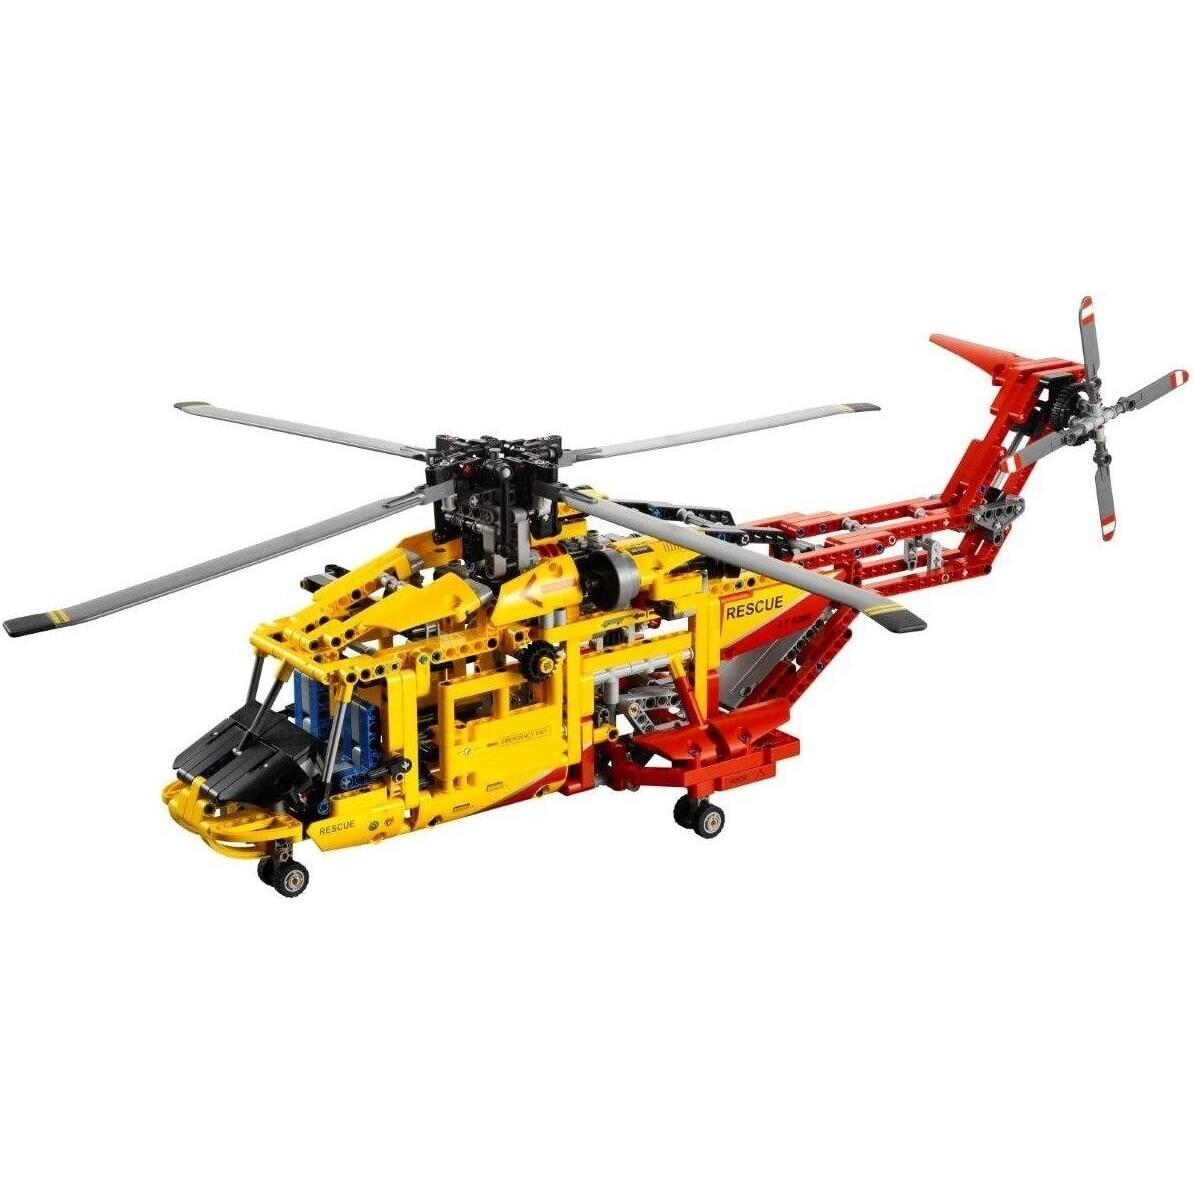 Lego Technic: Helicopter 9396 Retired Hard to Find Building Set